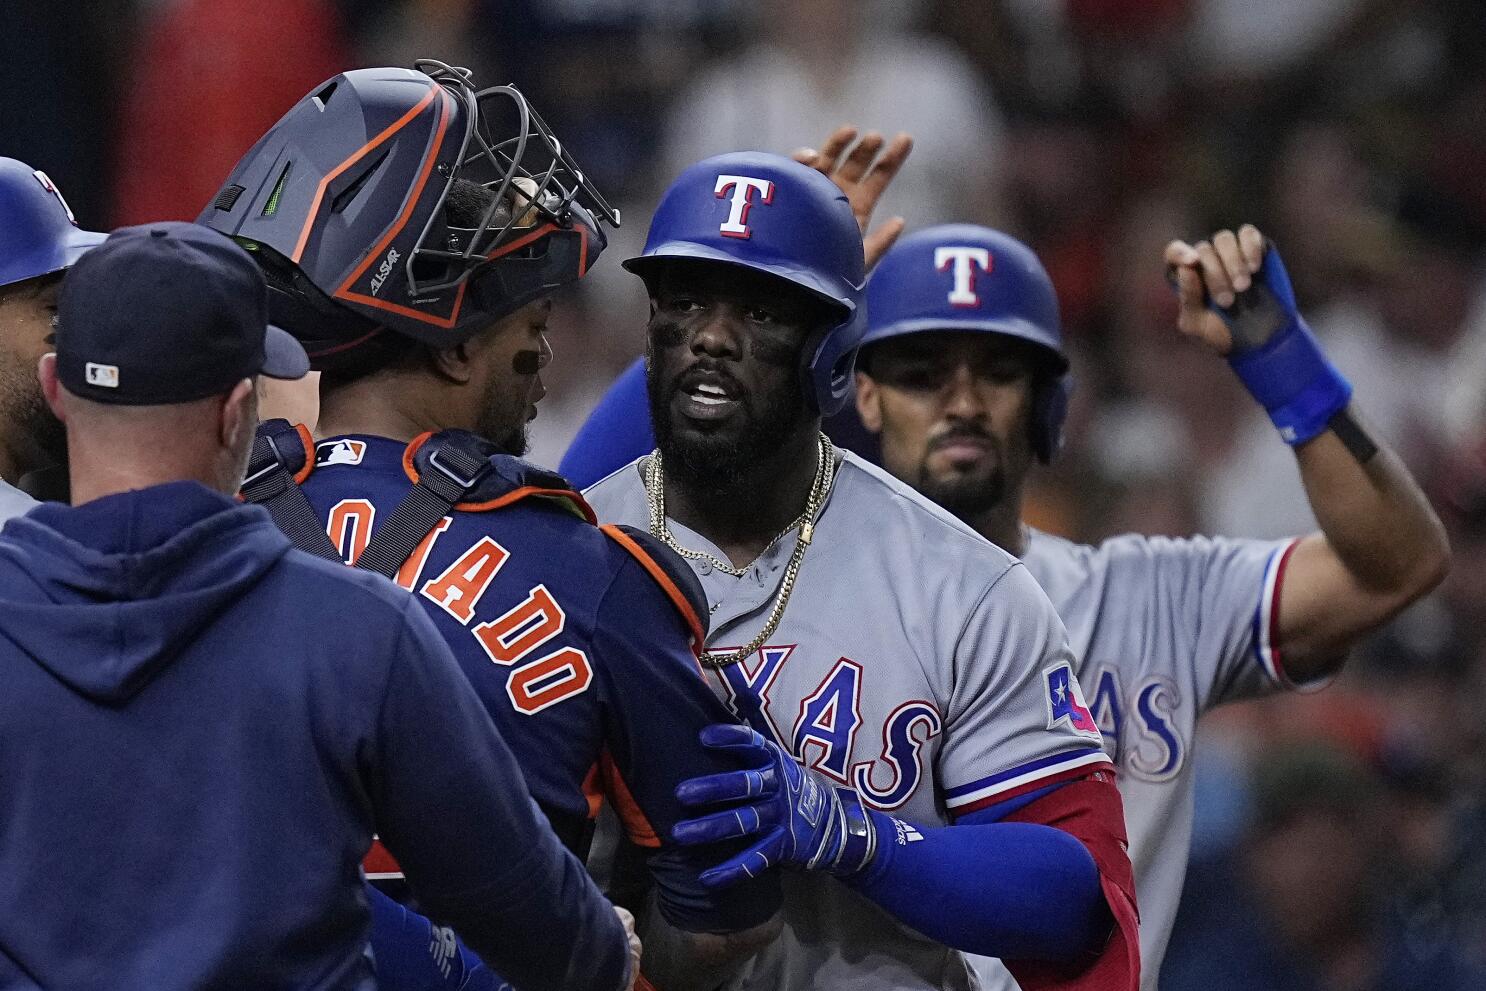 Houston Astros, Texas Rangers set for first-ever playoff meeting